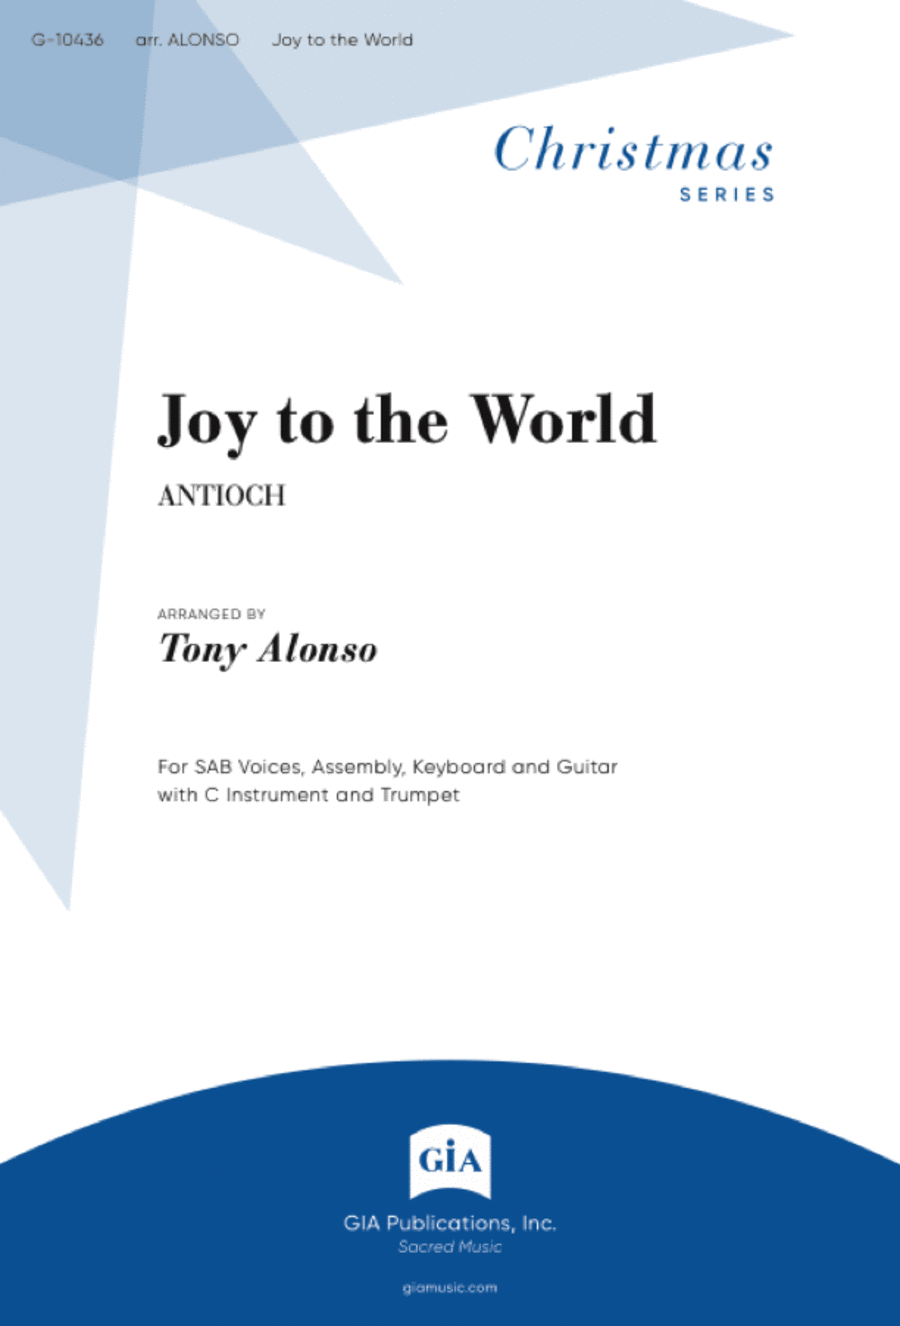 Joy to the World - Guitar edition